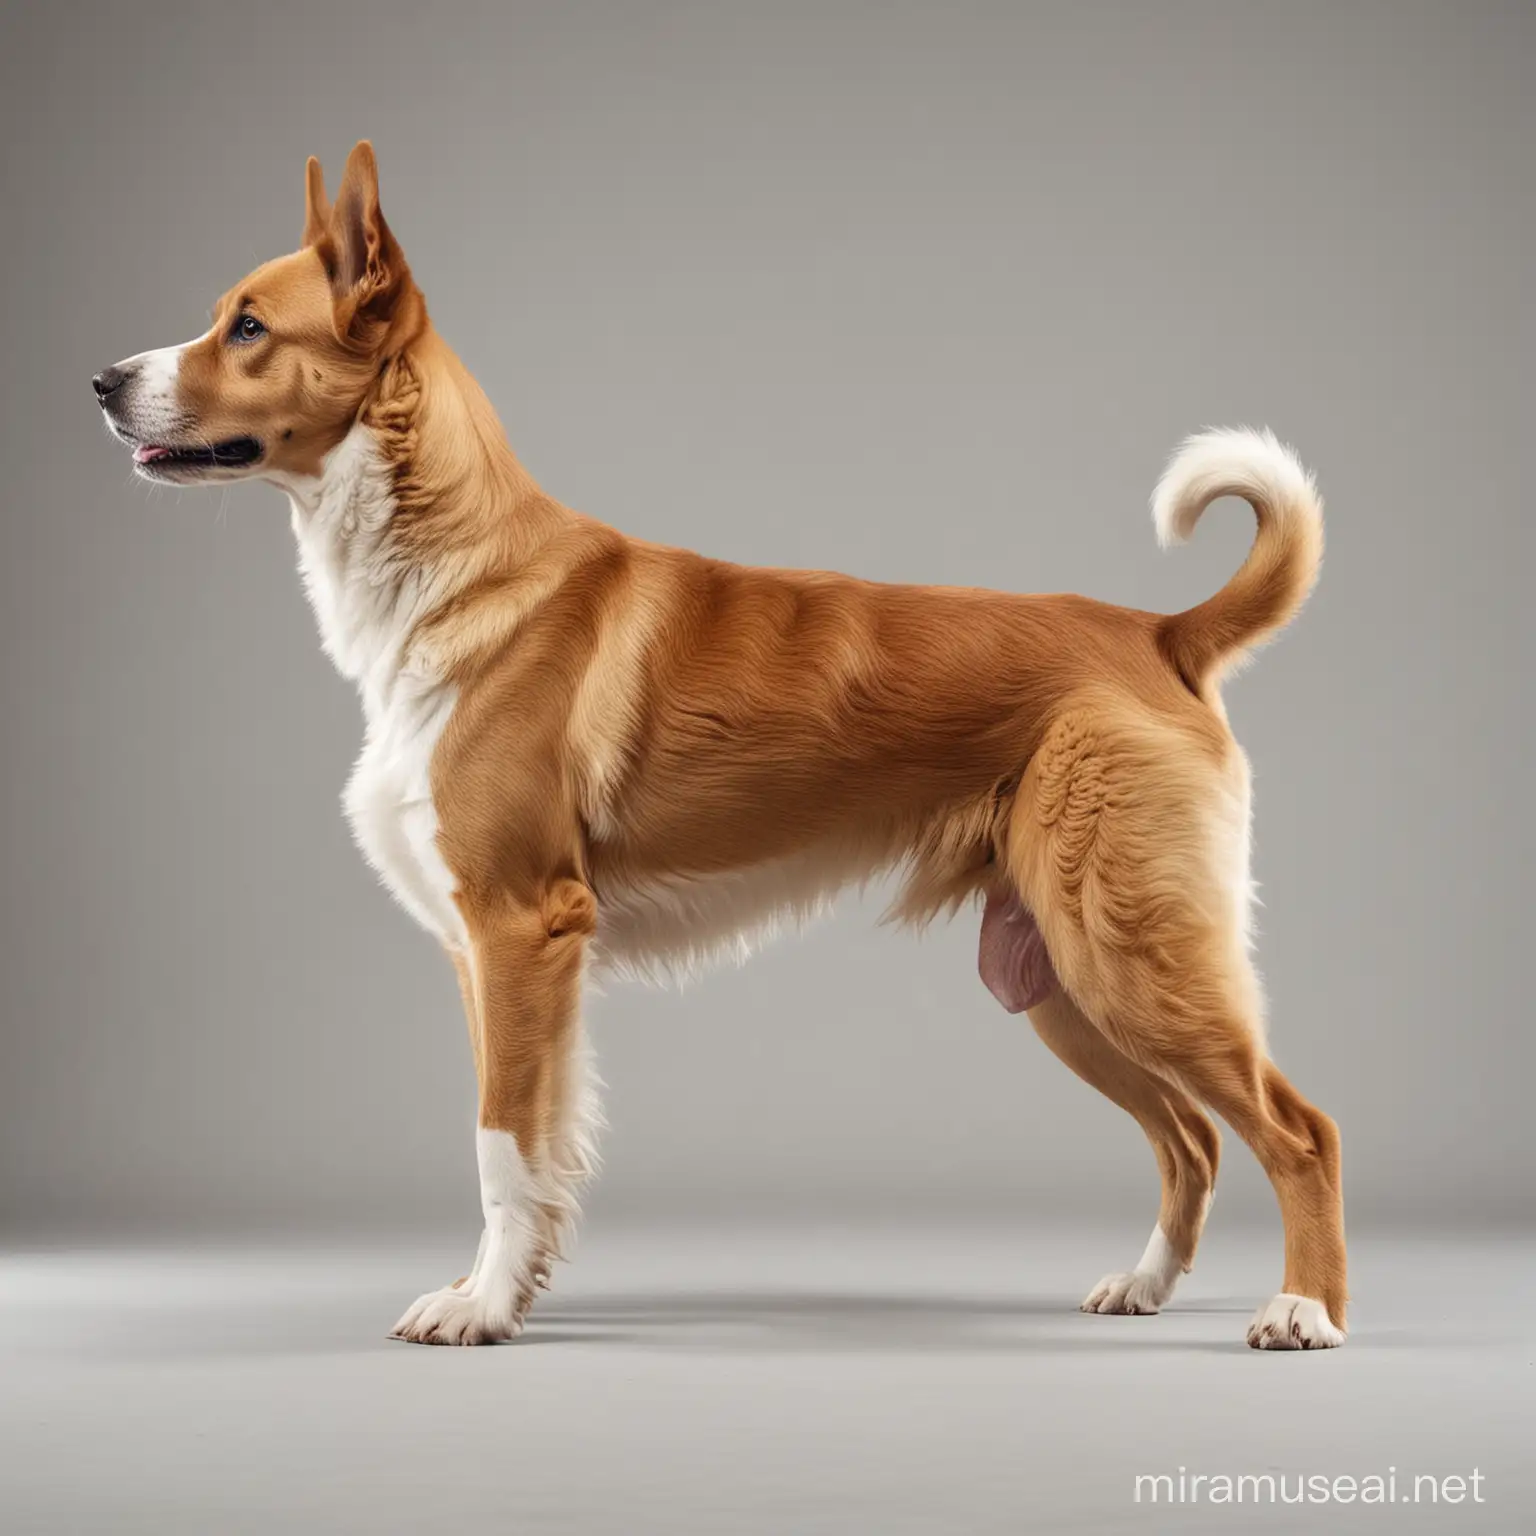 Side View of a Standing Dog